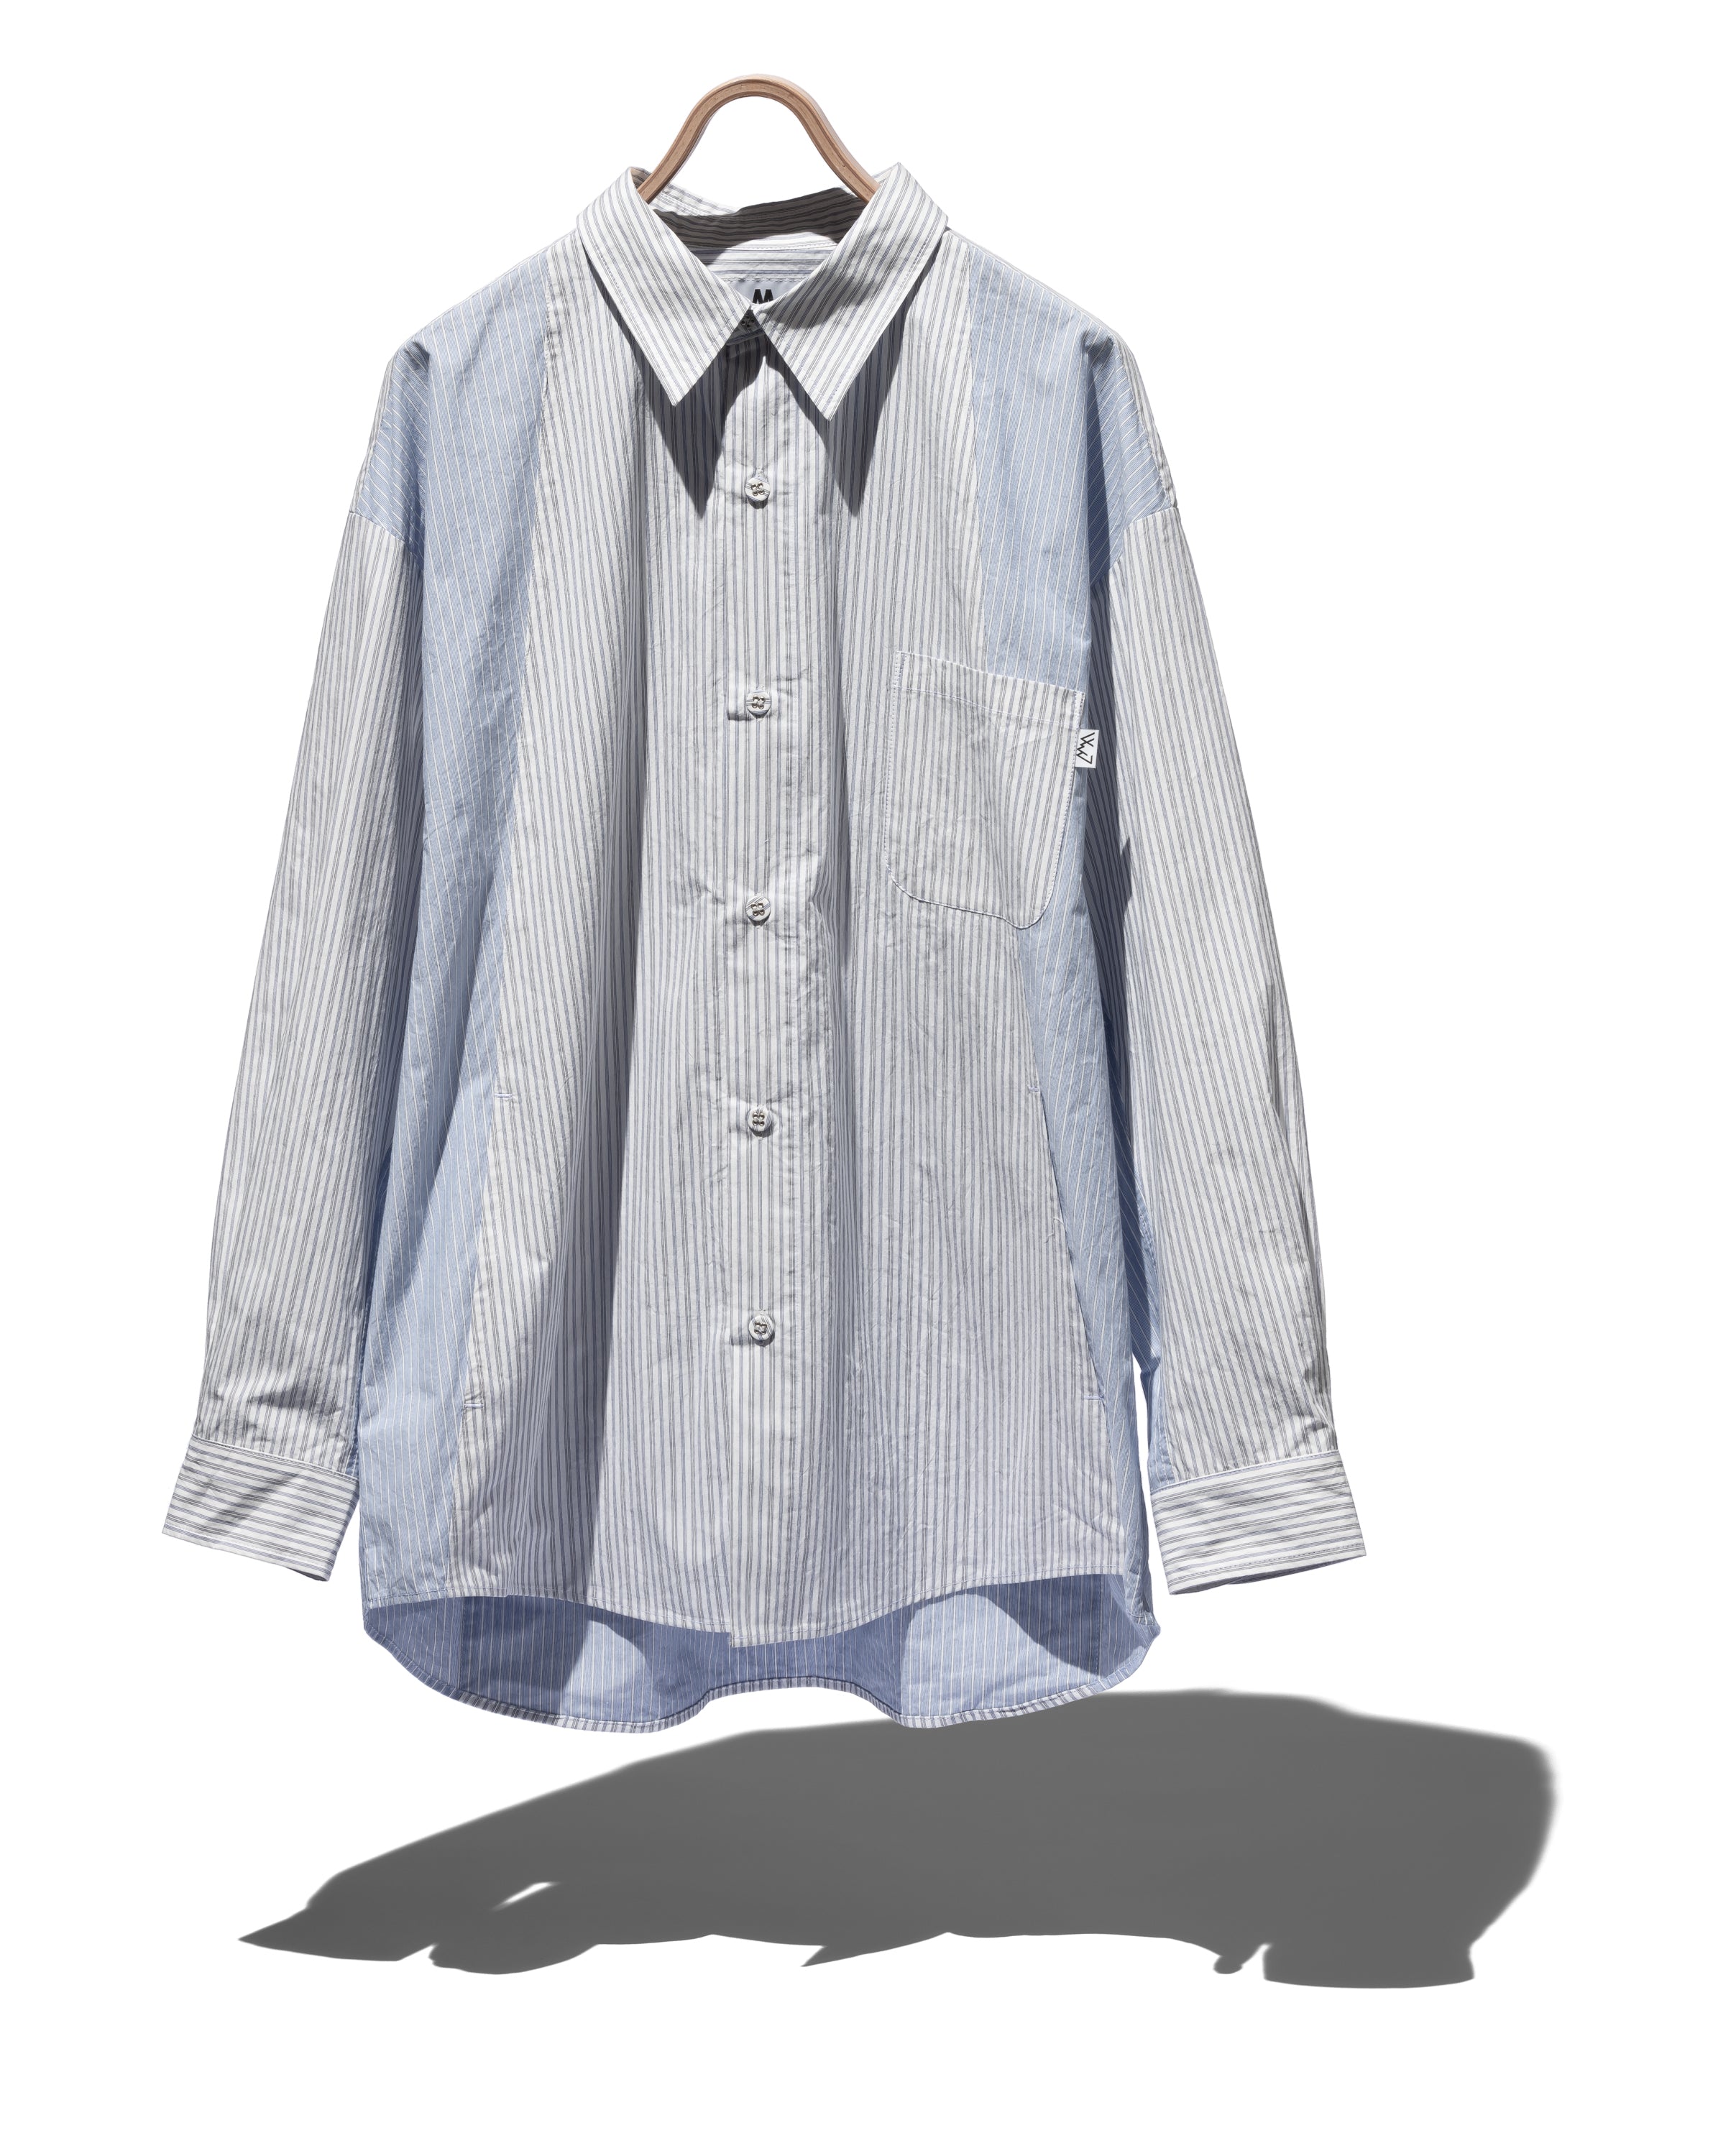 COMFY OUTDOOR GARMENT FRENCH SHIRTS - シャツ